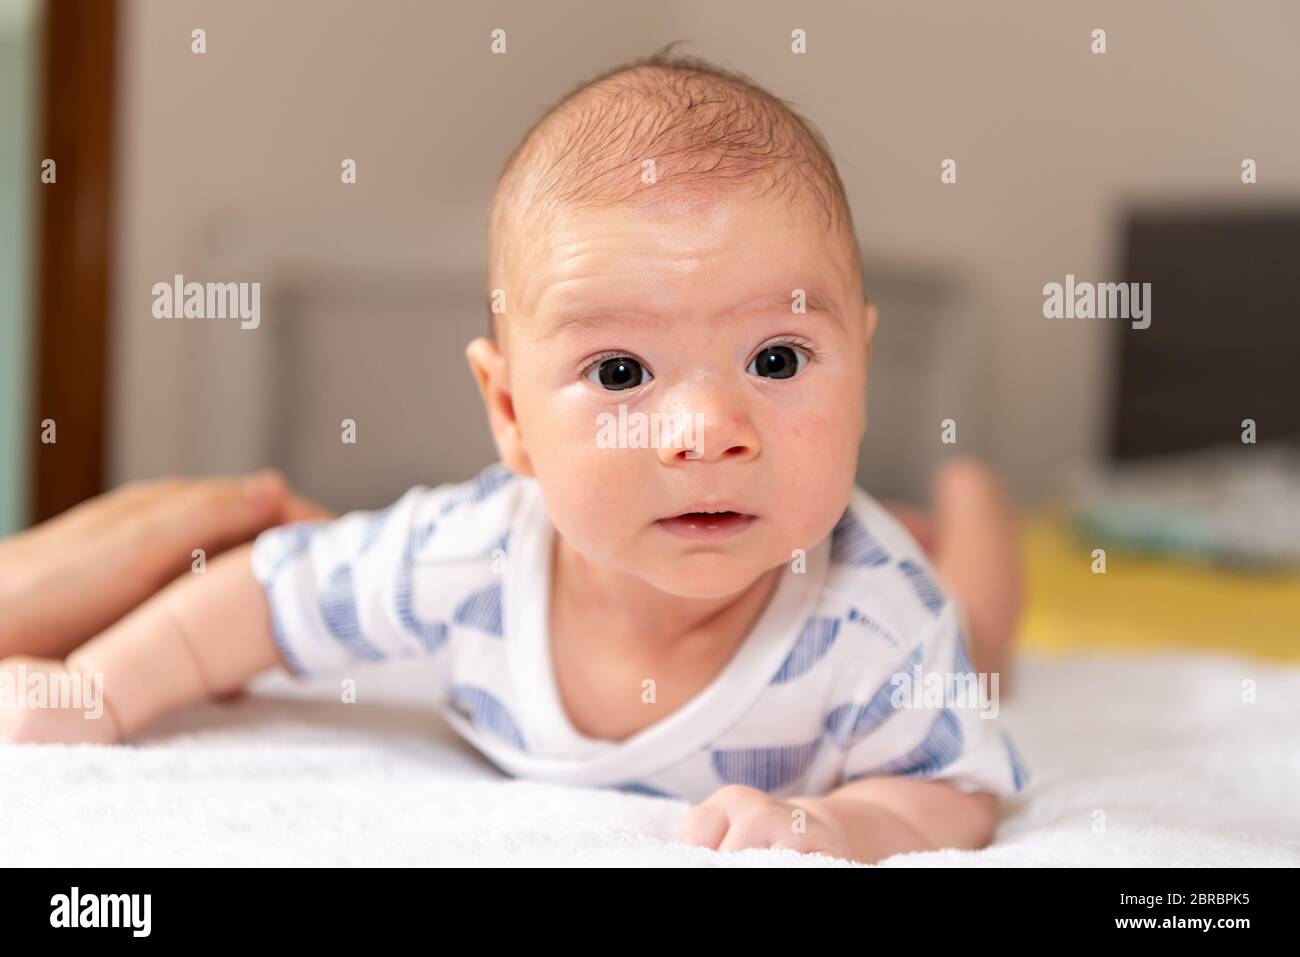 Adorable little baby boy during tummy time Stock Photo